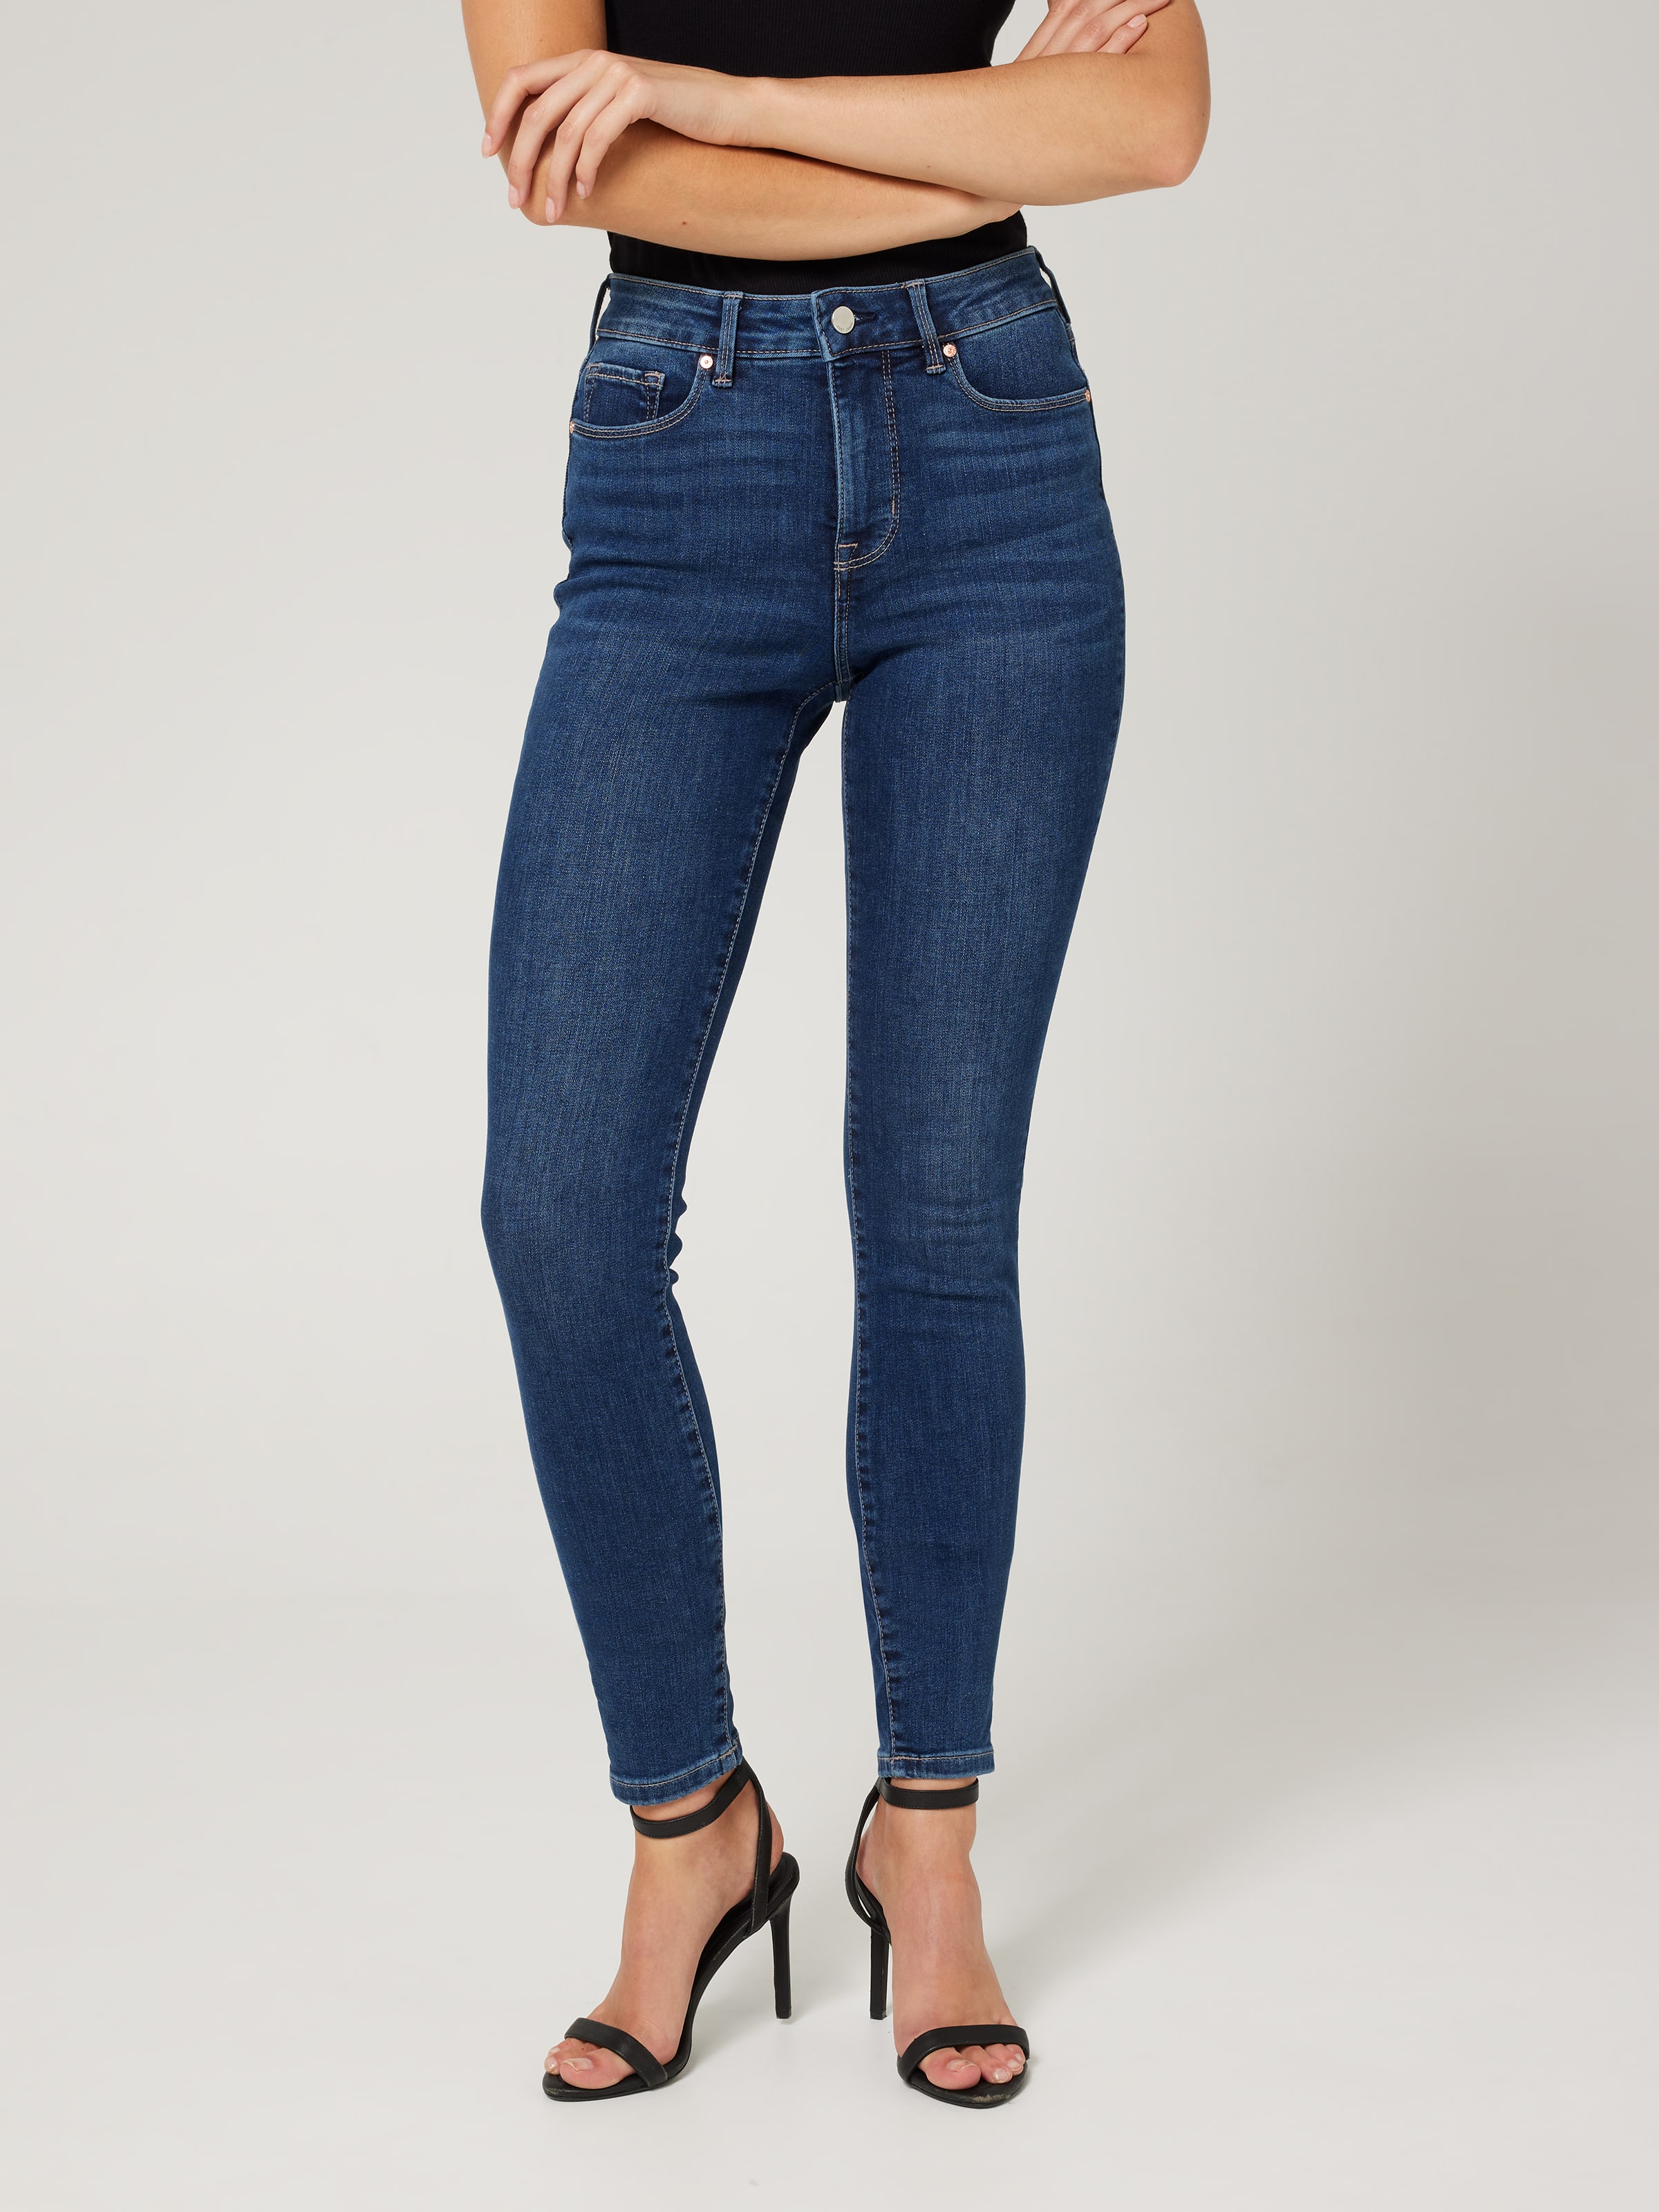 Reformed High Rise Skinny Jean In Tall Length - Just Jeans Online